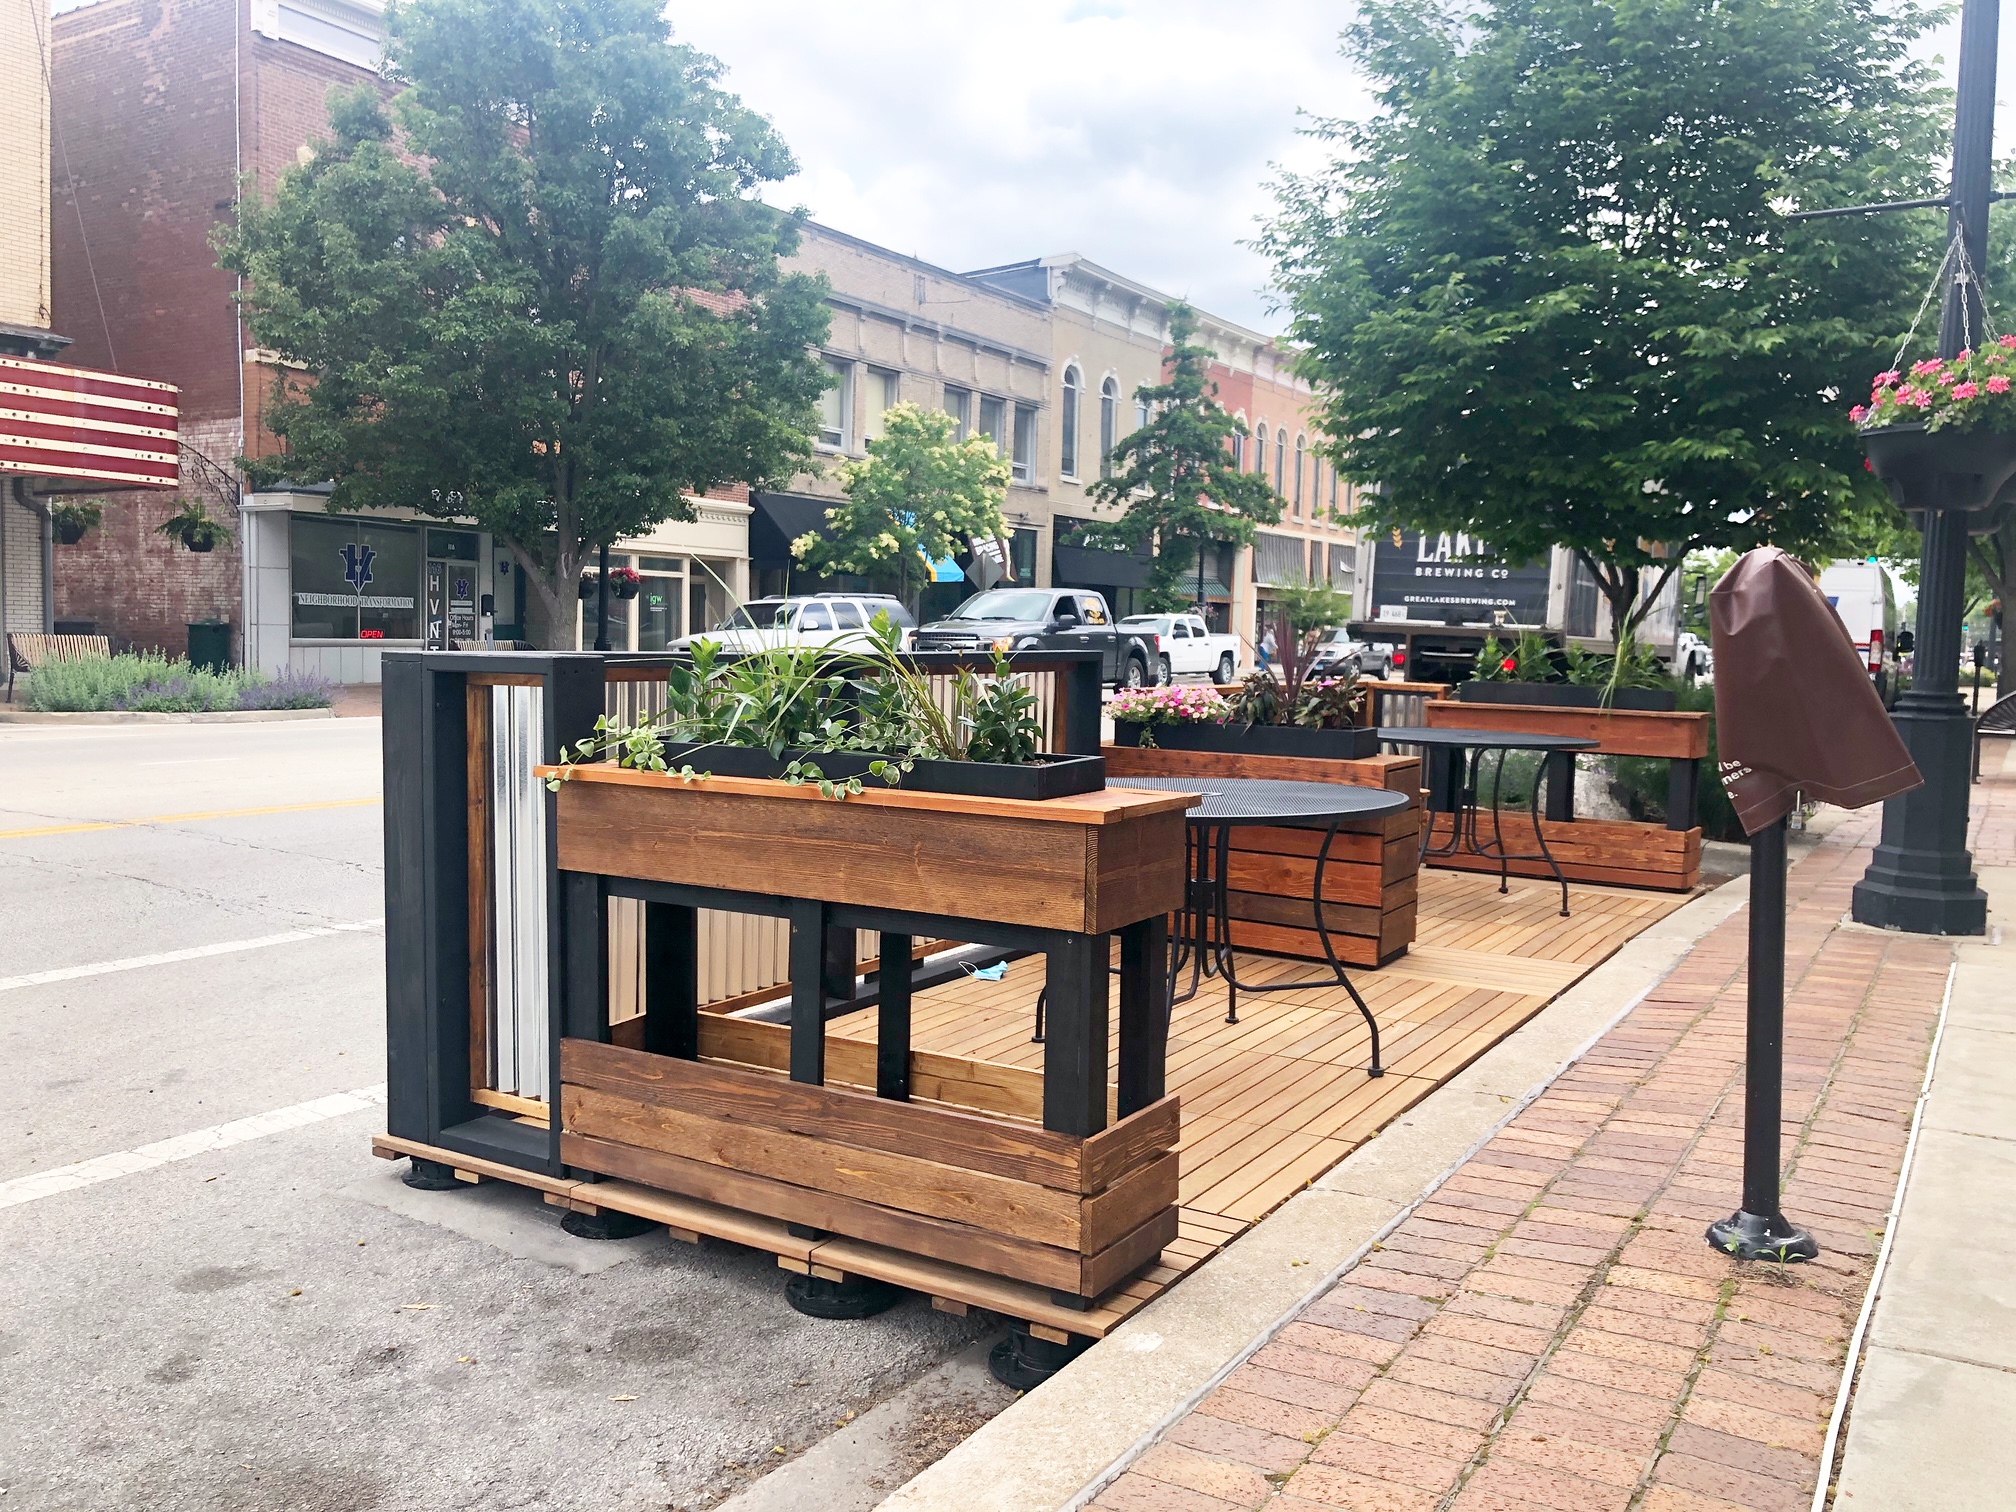 Outdoor public seating in Downtown Urbana called Curbanas are assembled in front on Nola's Rock Bar. Photo by Alyssa Buckley.